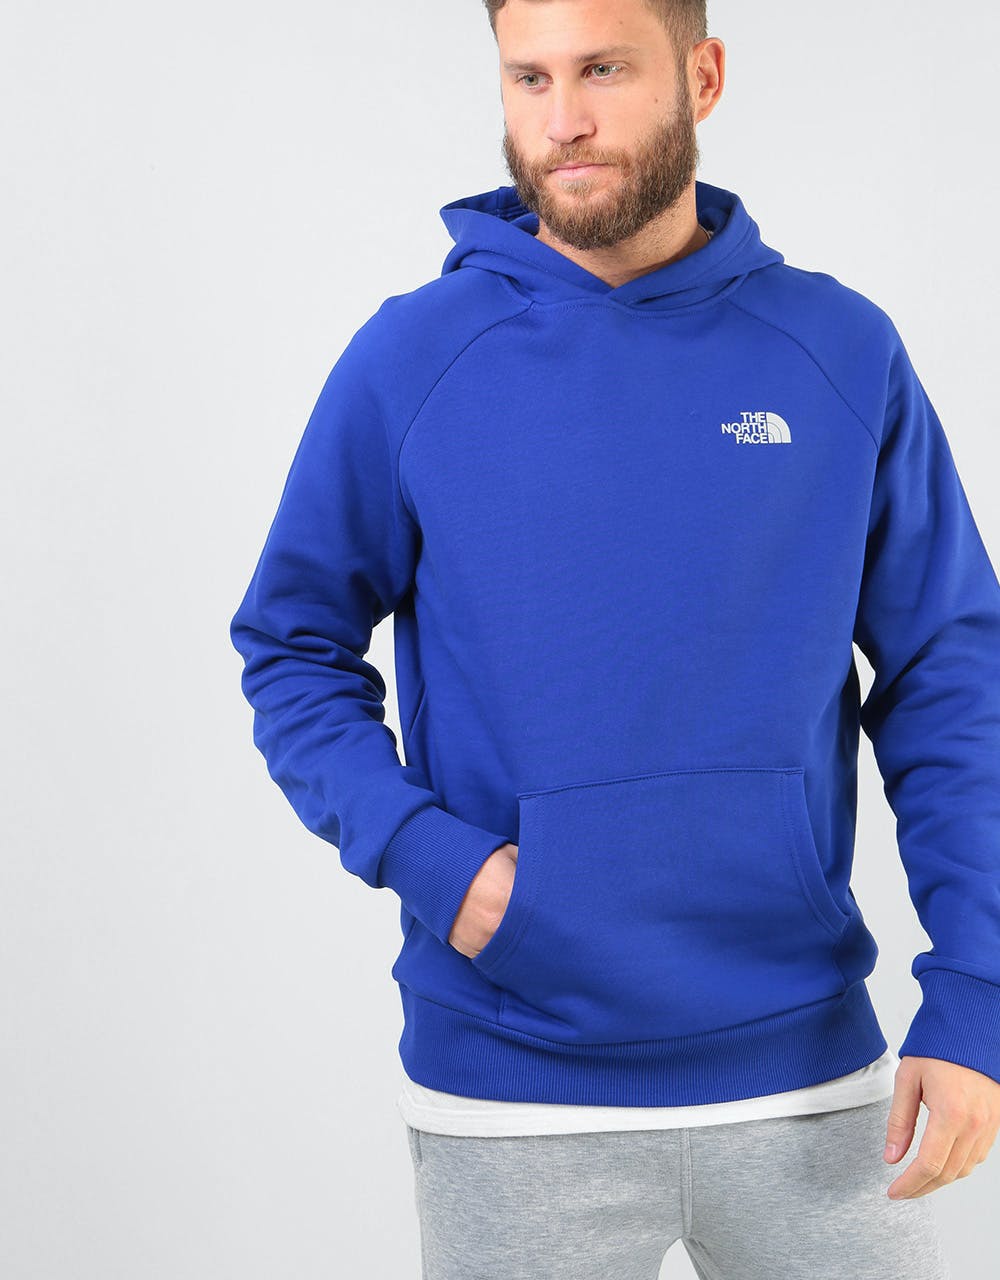 The North Face Raglan Red Box Pullover Hoodie - Lapis Blue